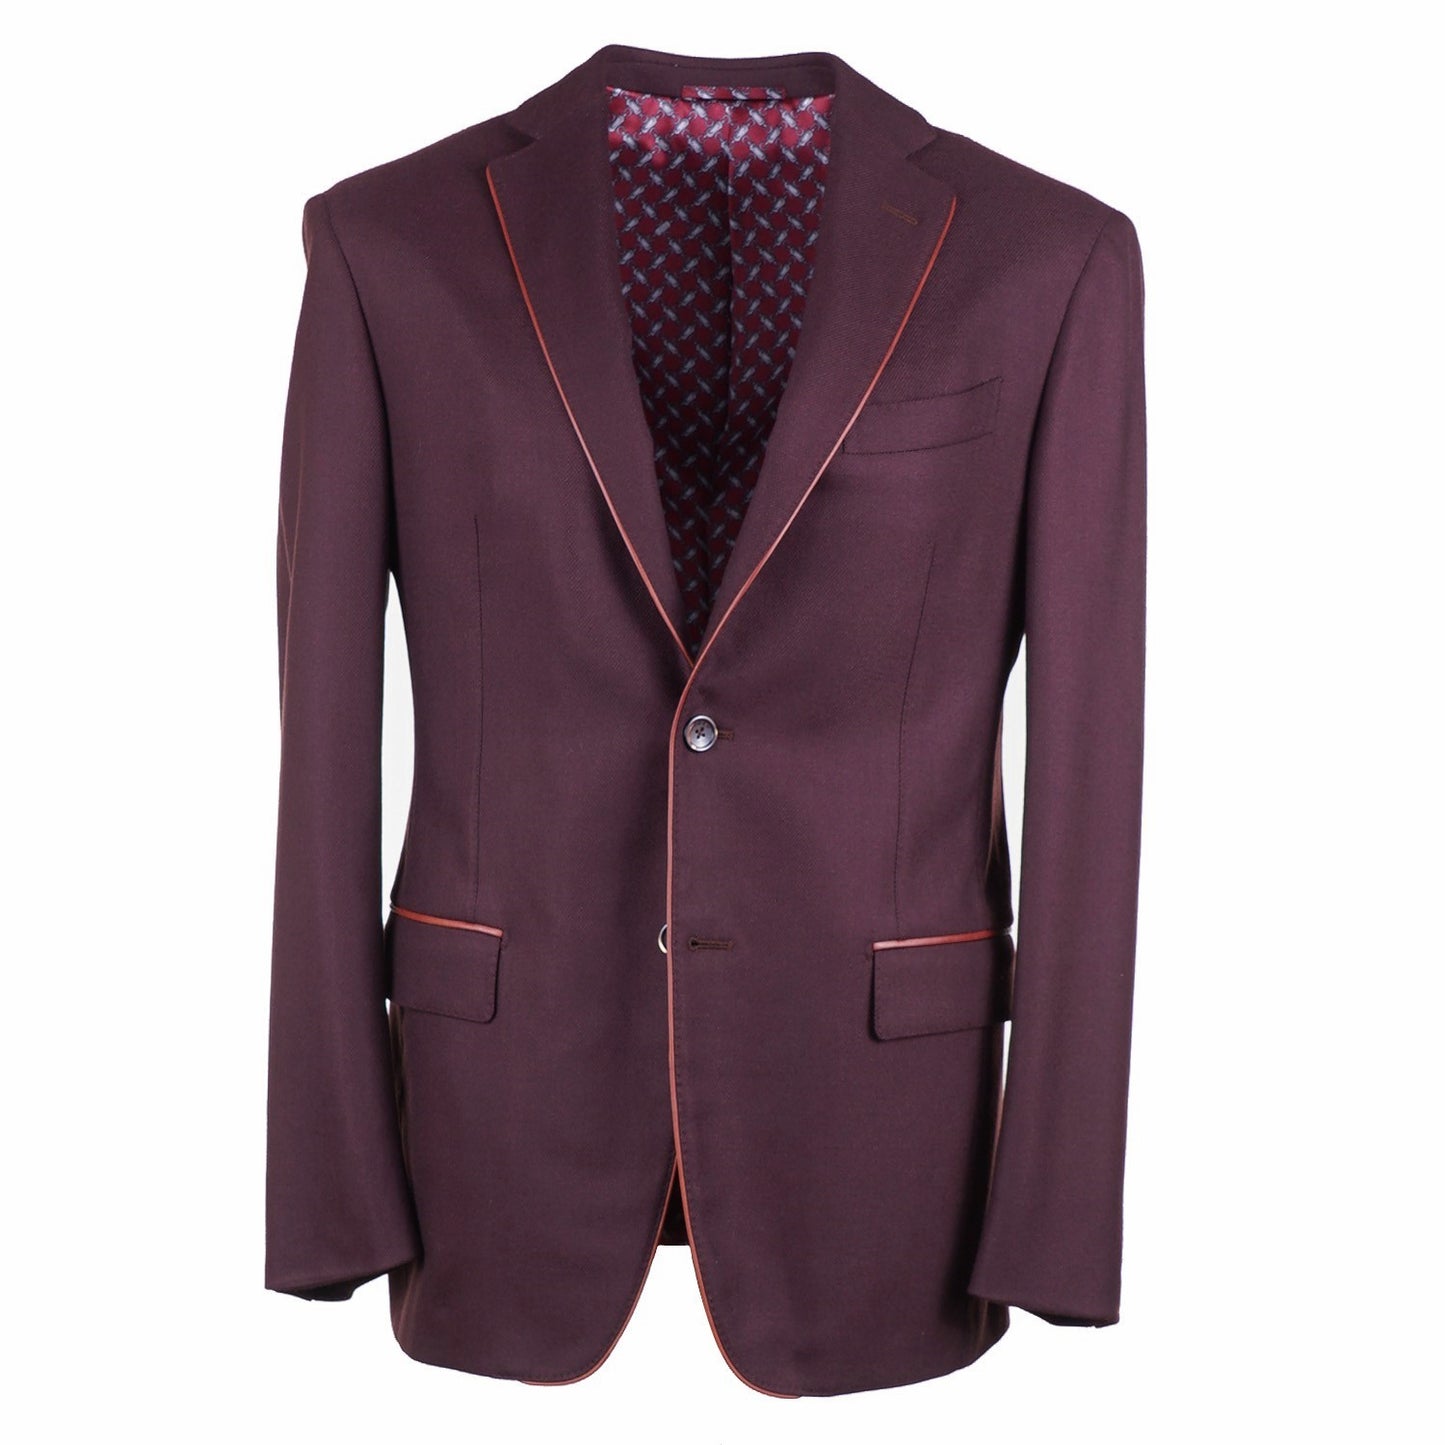 Zilli Cashmere Sport Coat with Leather Details - Top Shelf Apparel